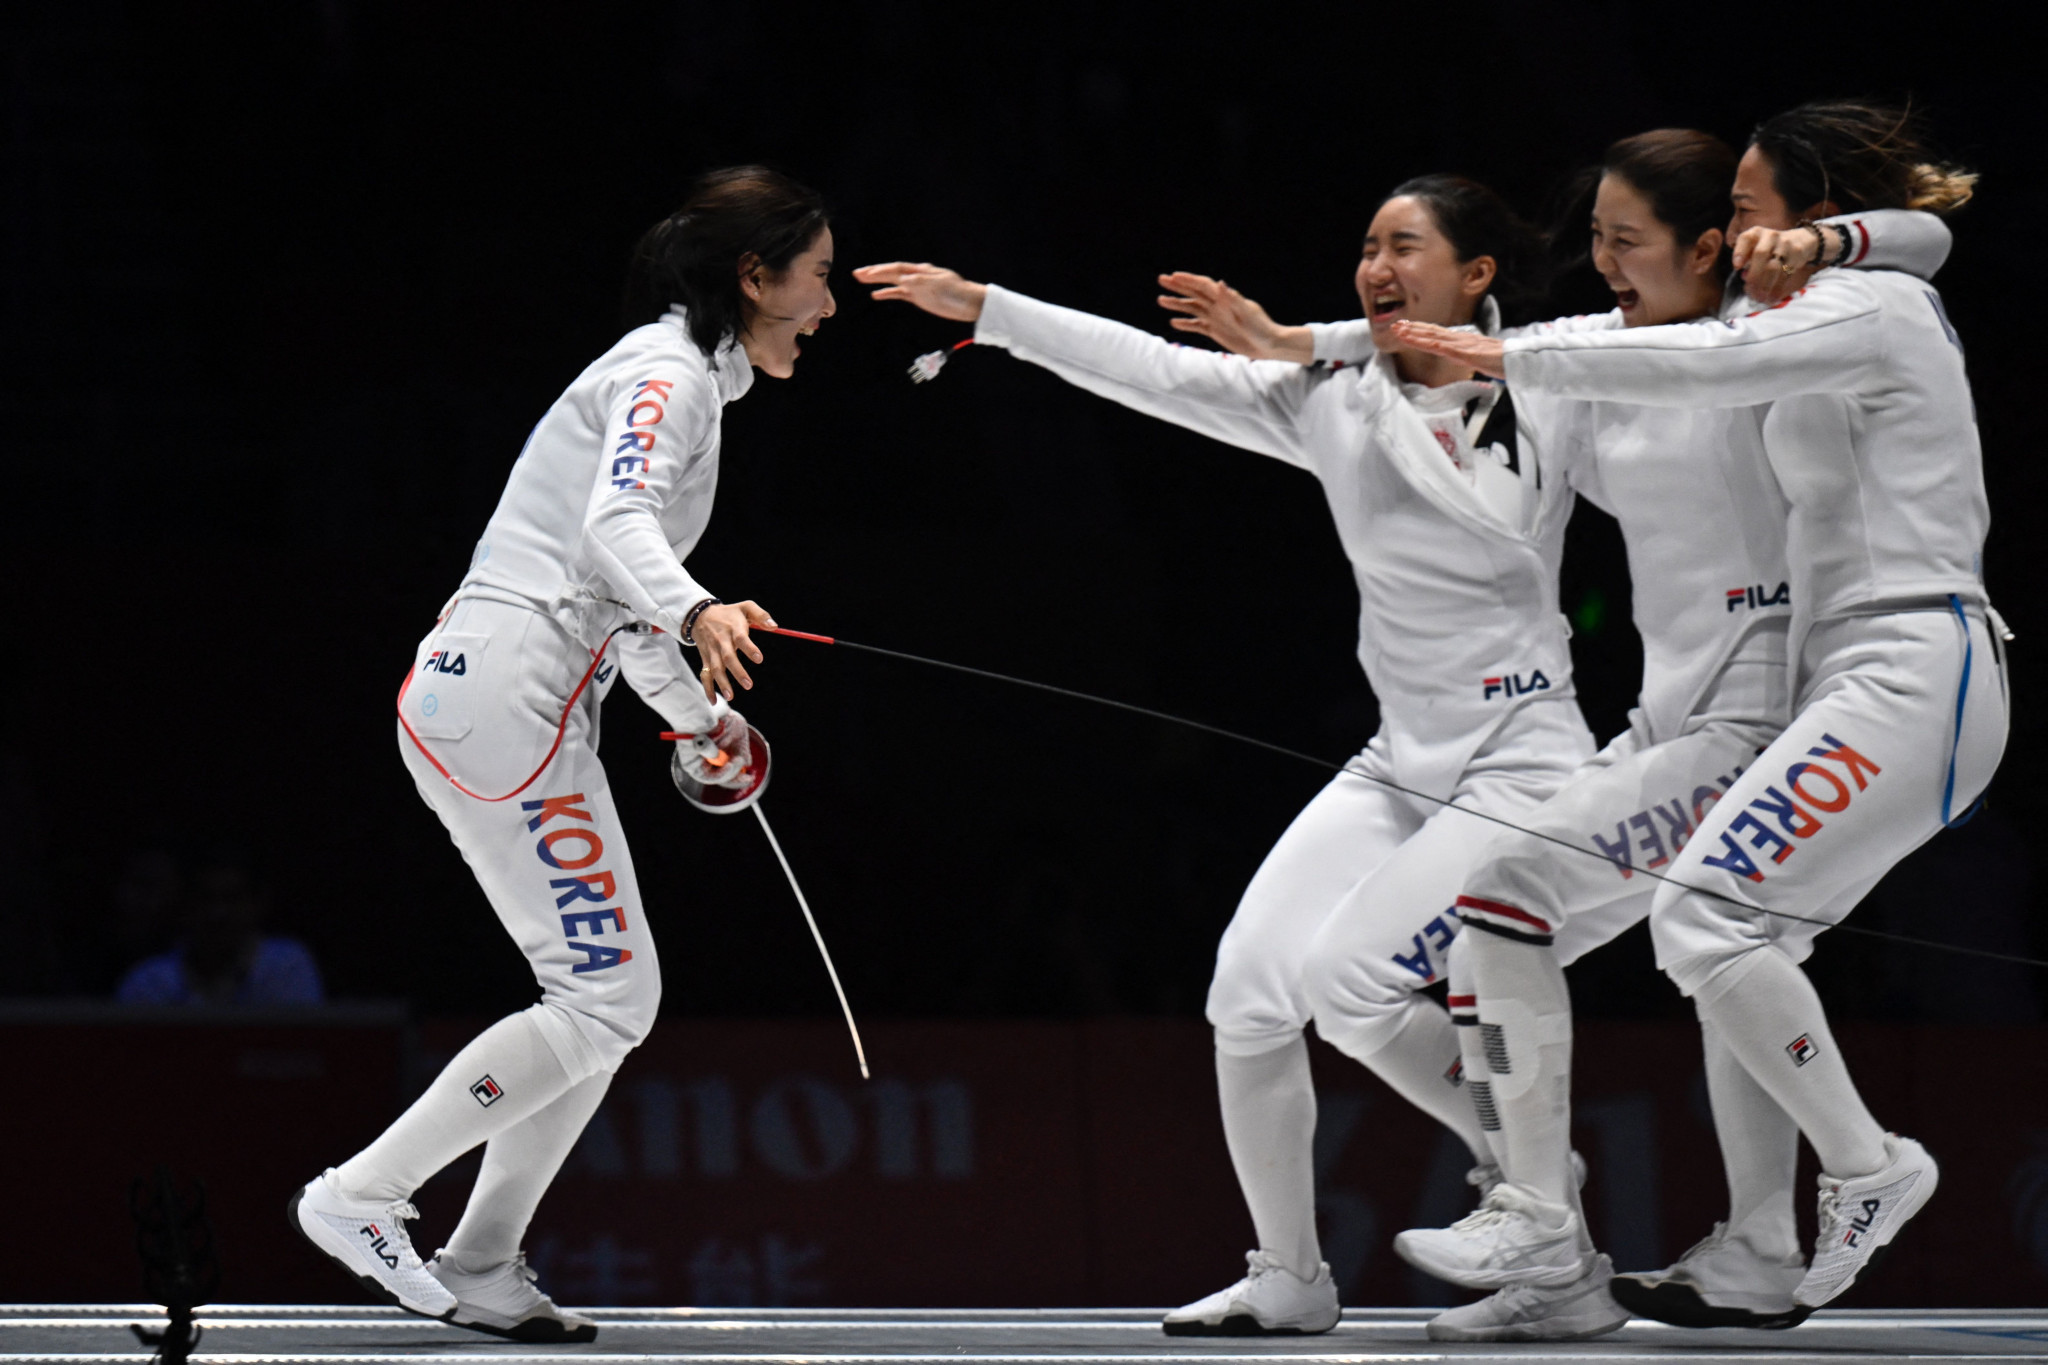 South Korea won both team fencing gold medals with respective triumphs in the women's épée and men's foil against Hong Kong and China ©Getty Images